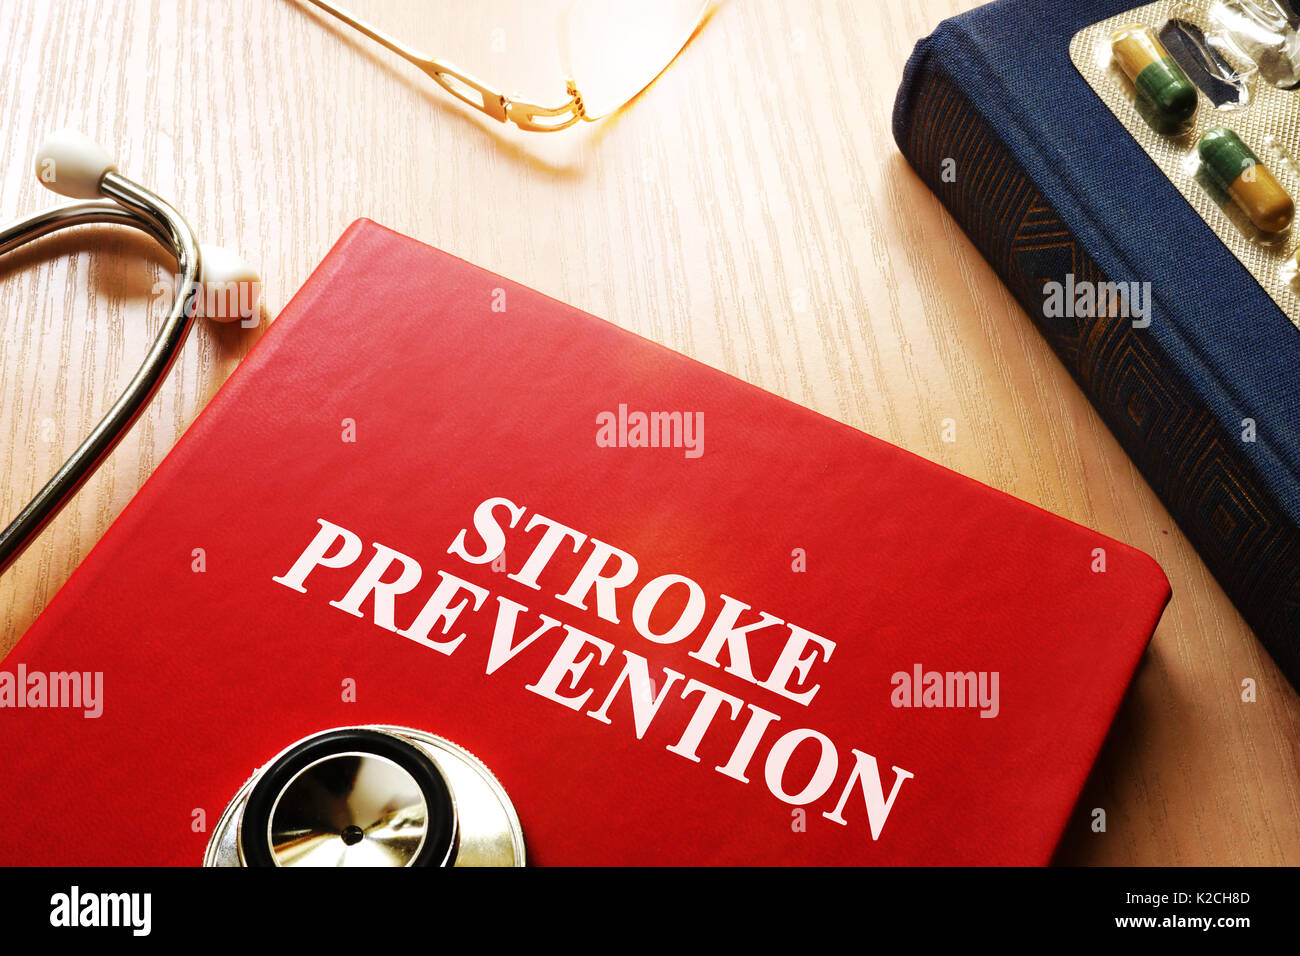 Stroke Prevention written on a book cover. Stock Photo